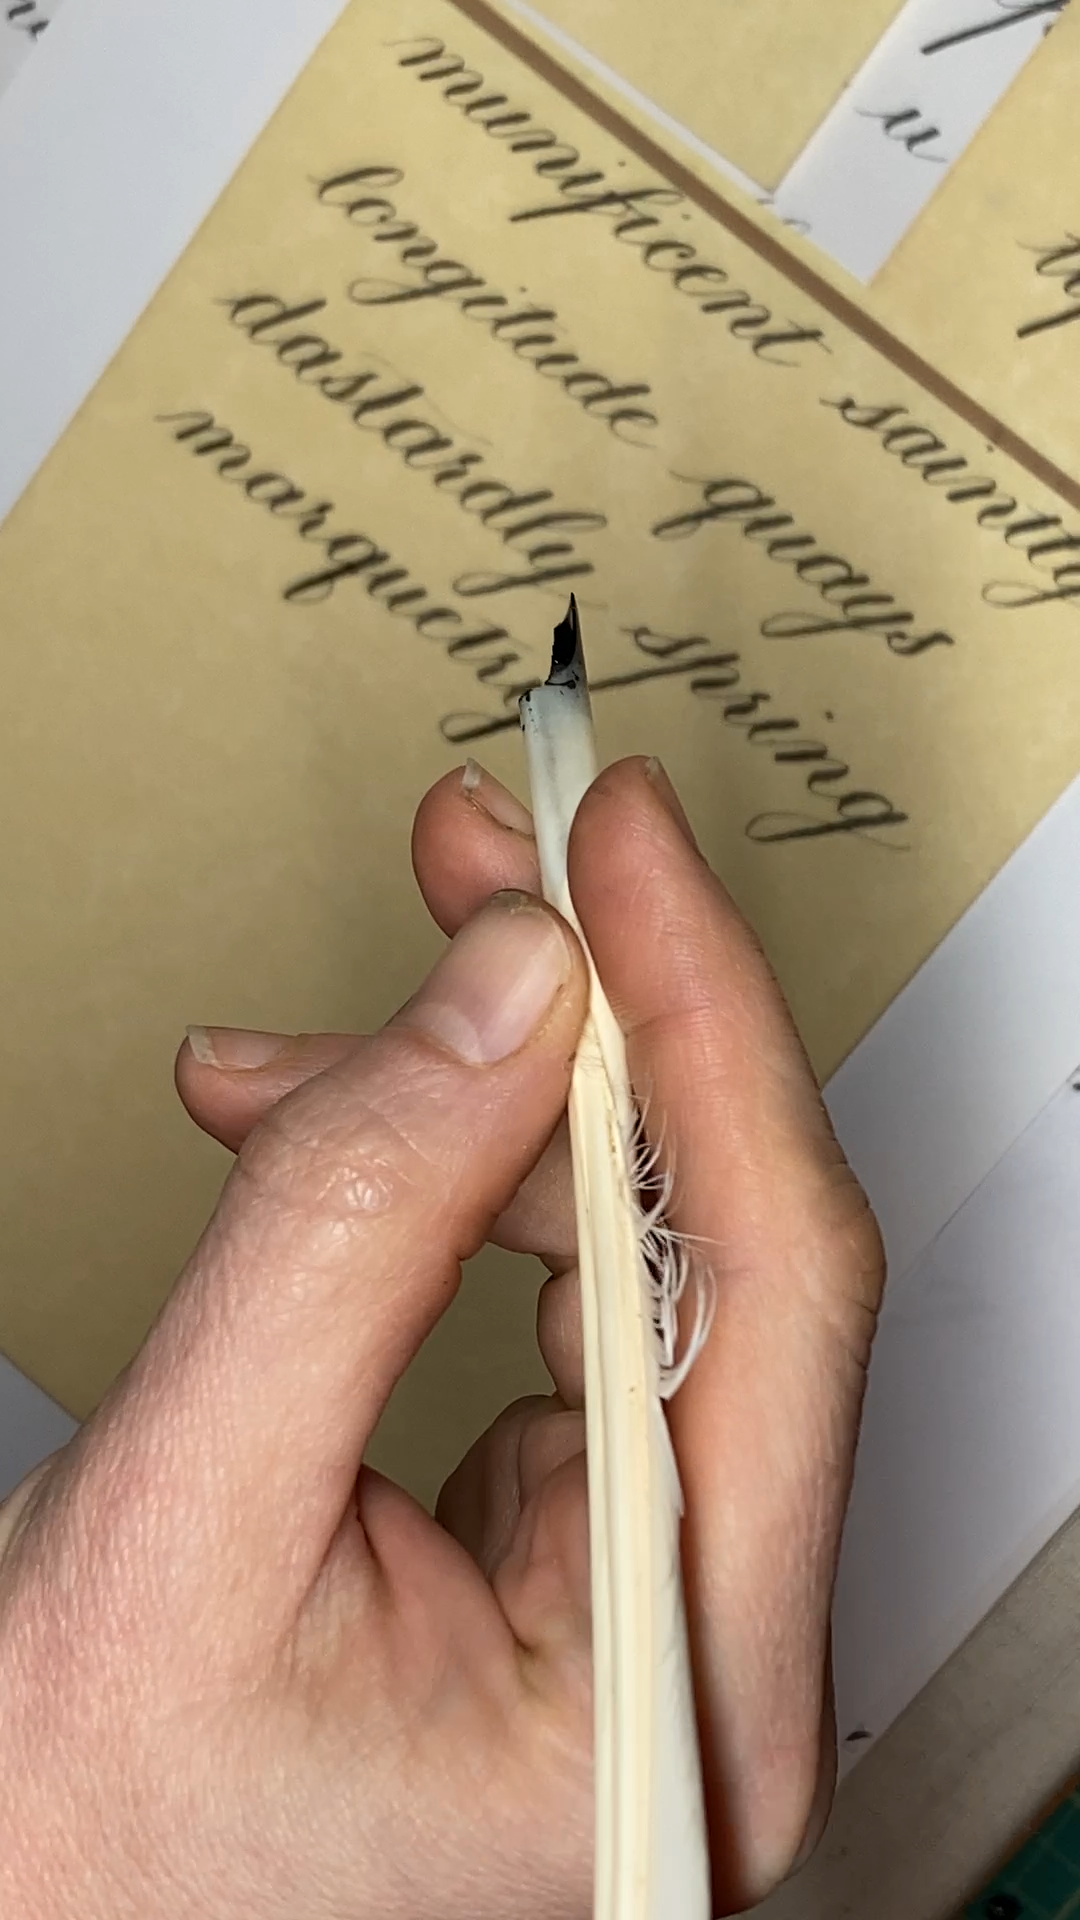 copperplate calligraphy examples